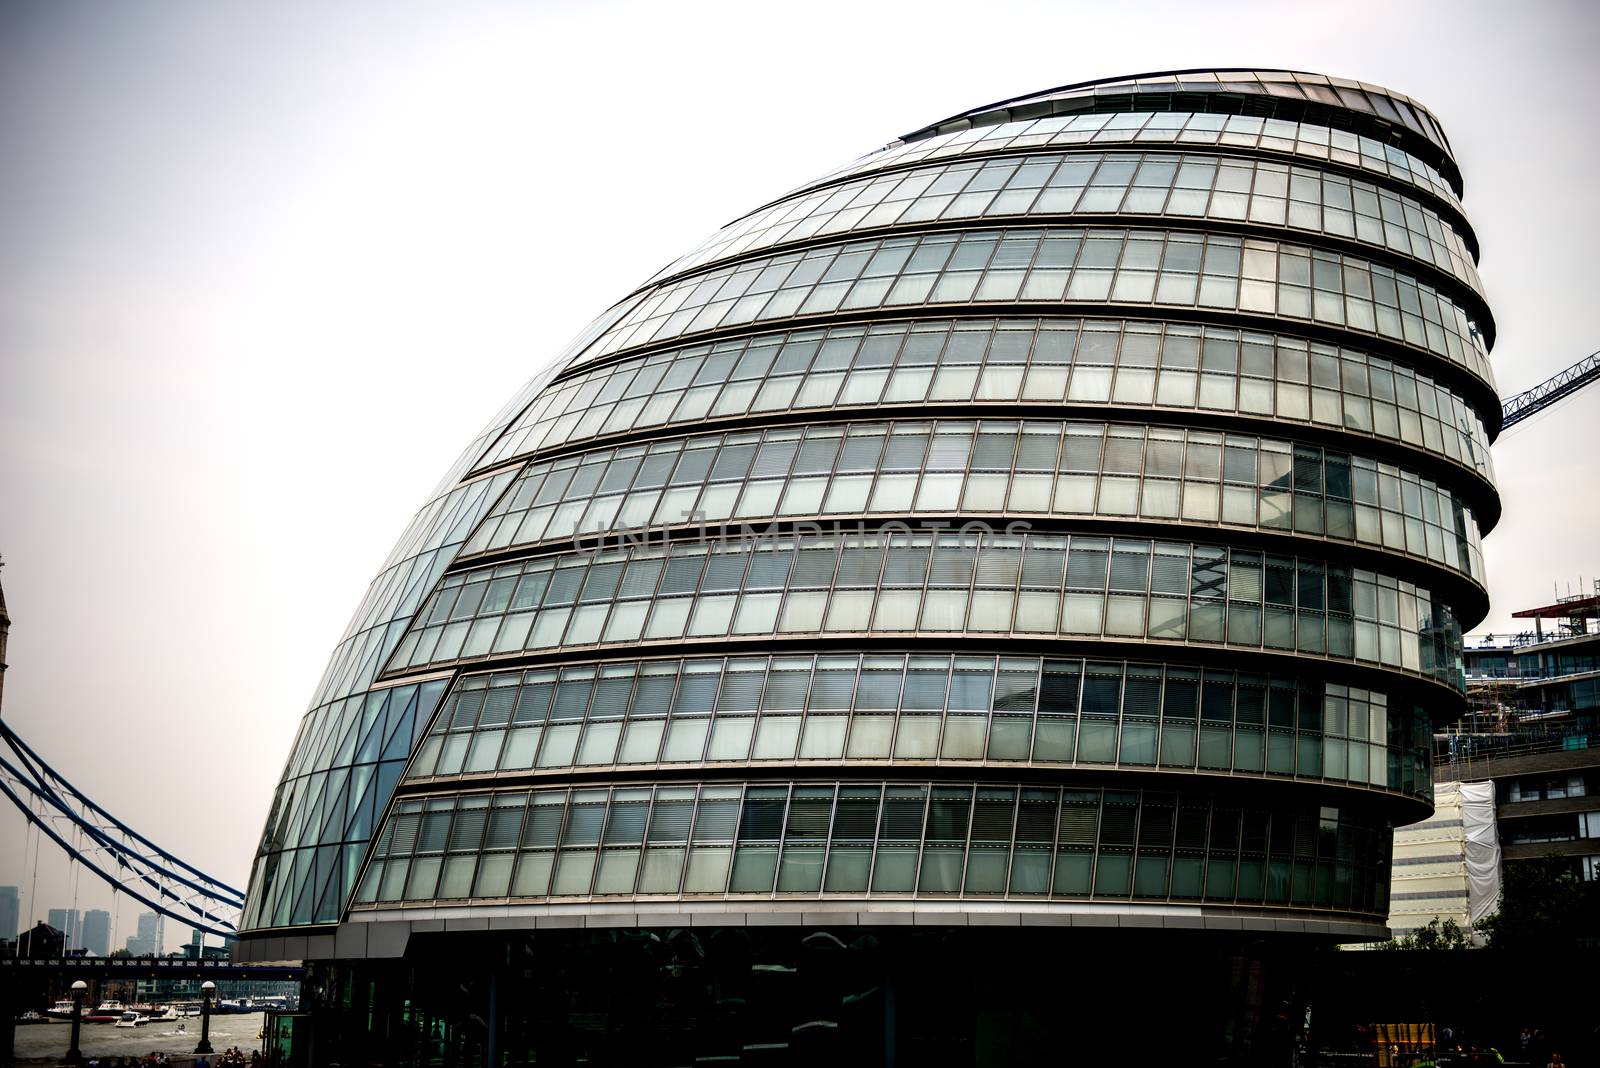 Headquarters of Greater London Authority known as City Hall by MohanaAntonMeryl